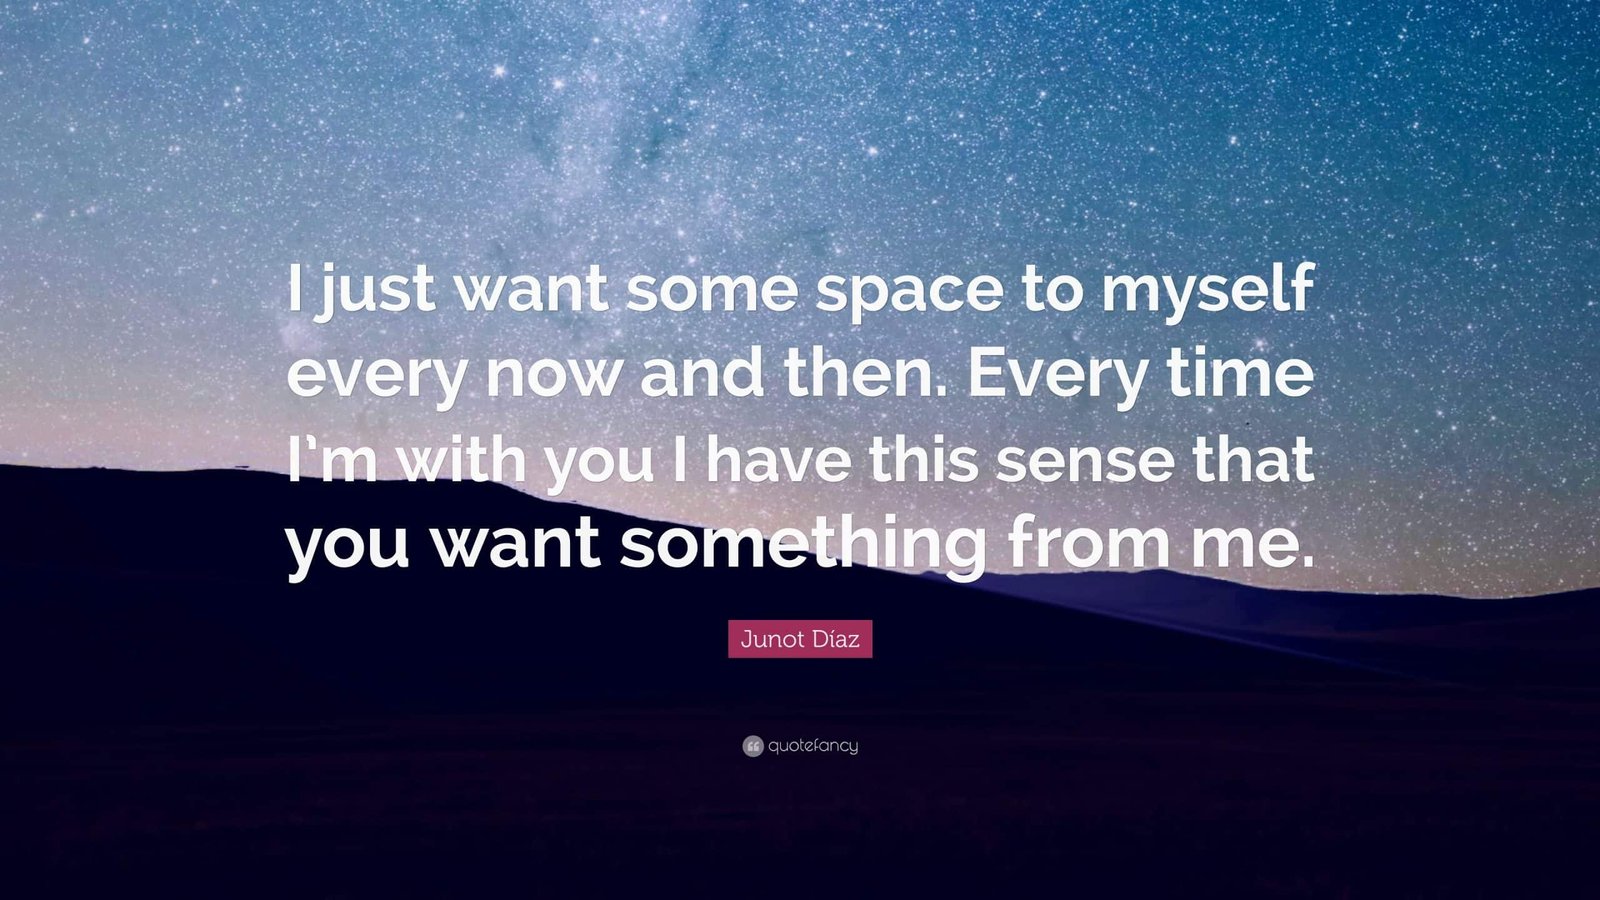 ﻿I have space to be myself.